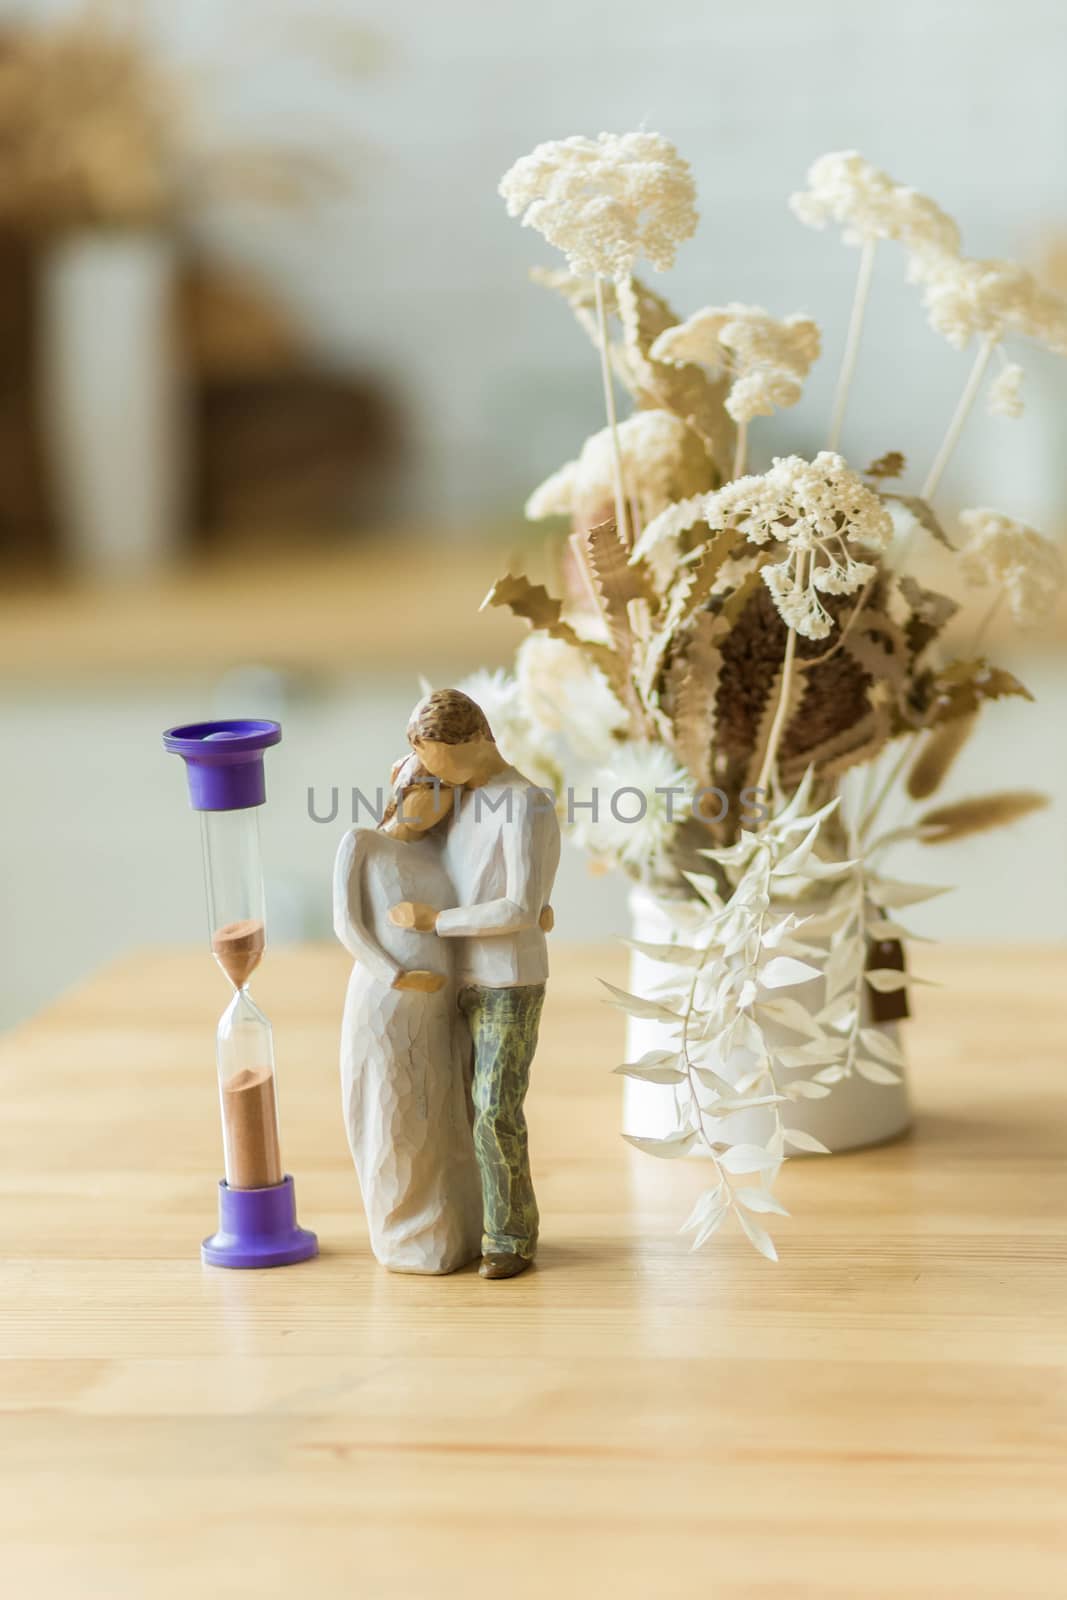 .Dried flowers in a vase on the dining table next to the hourglass and the statuette of the parents. Time is running out, manage to become parents